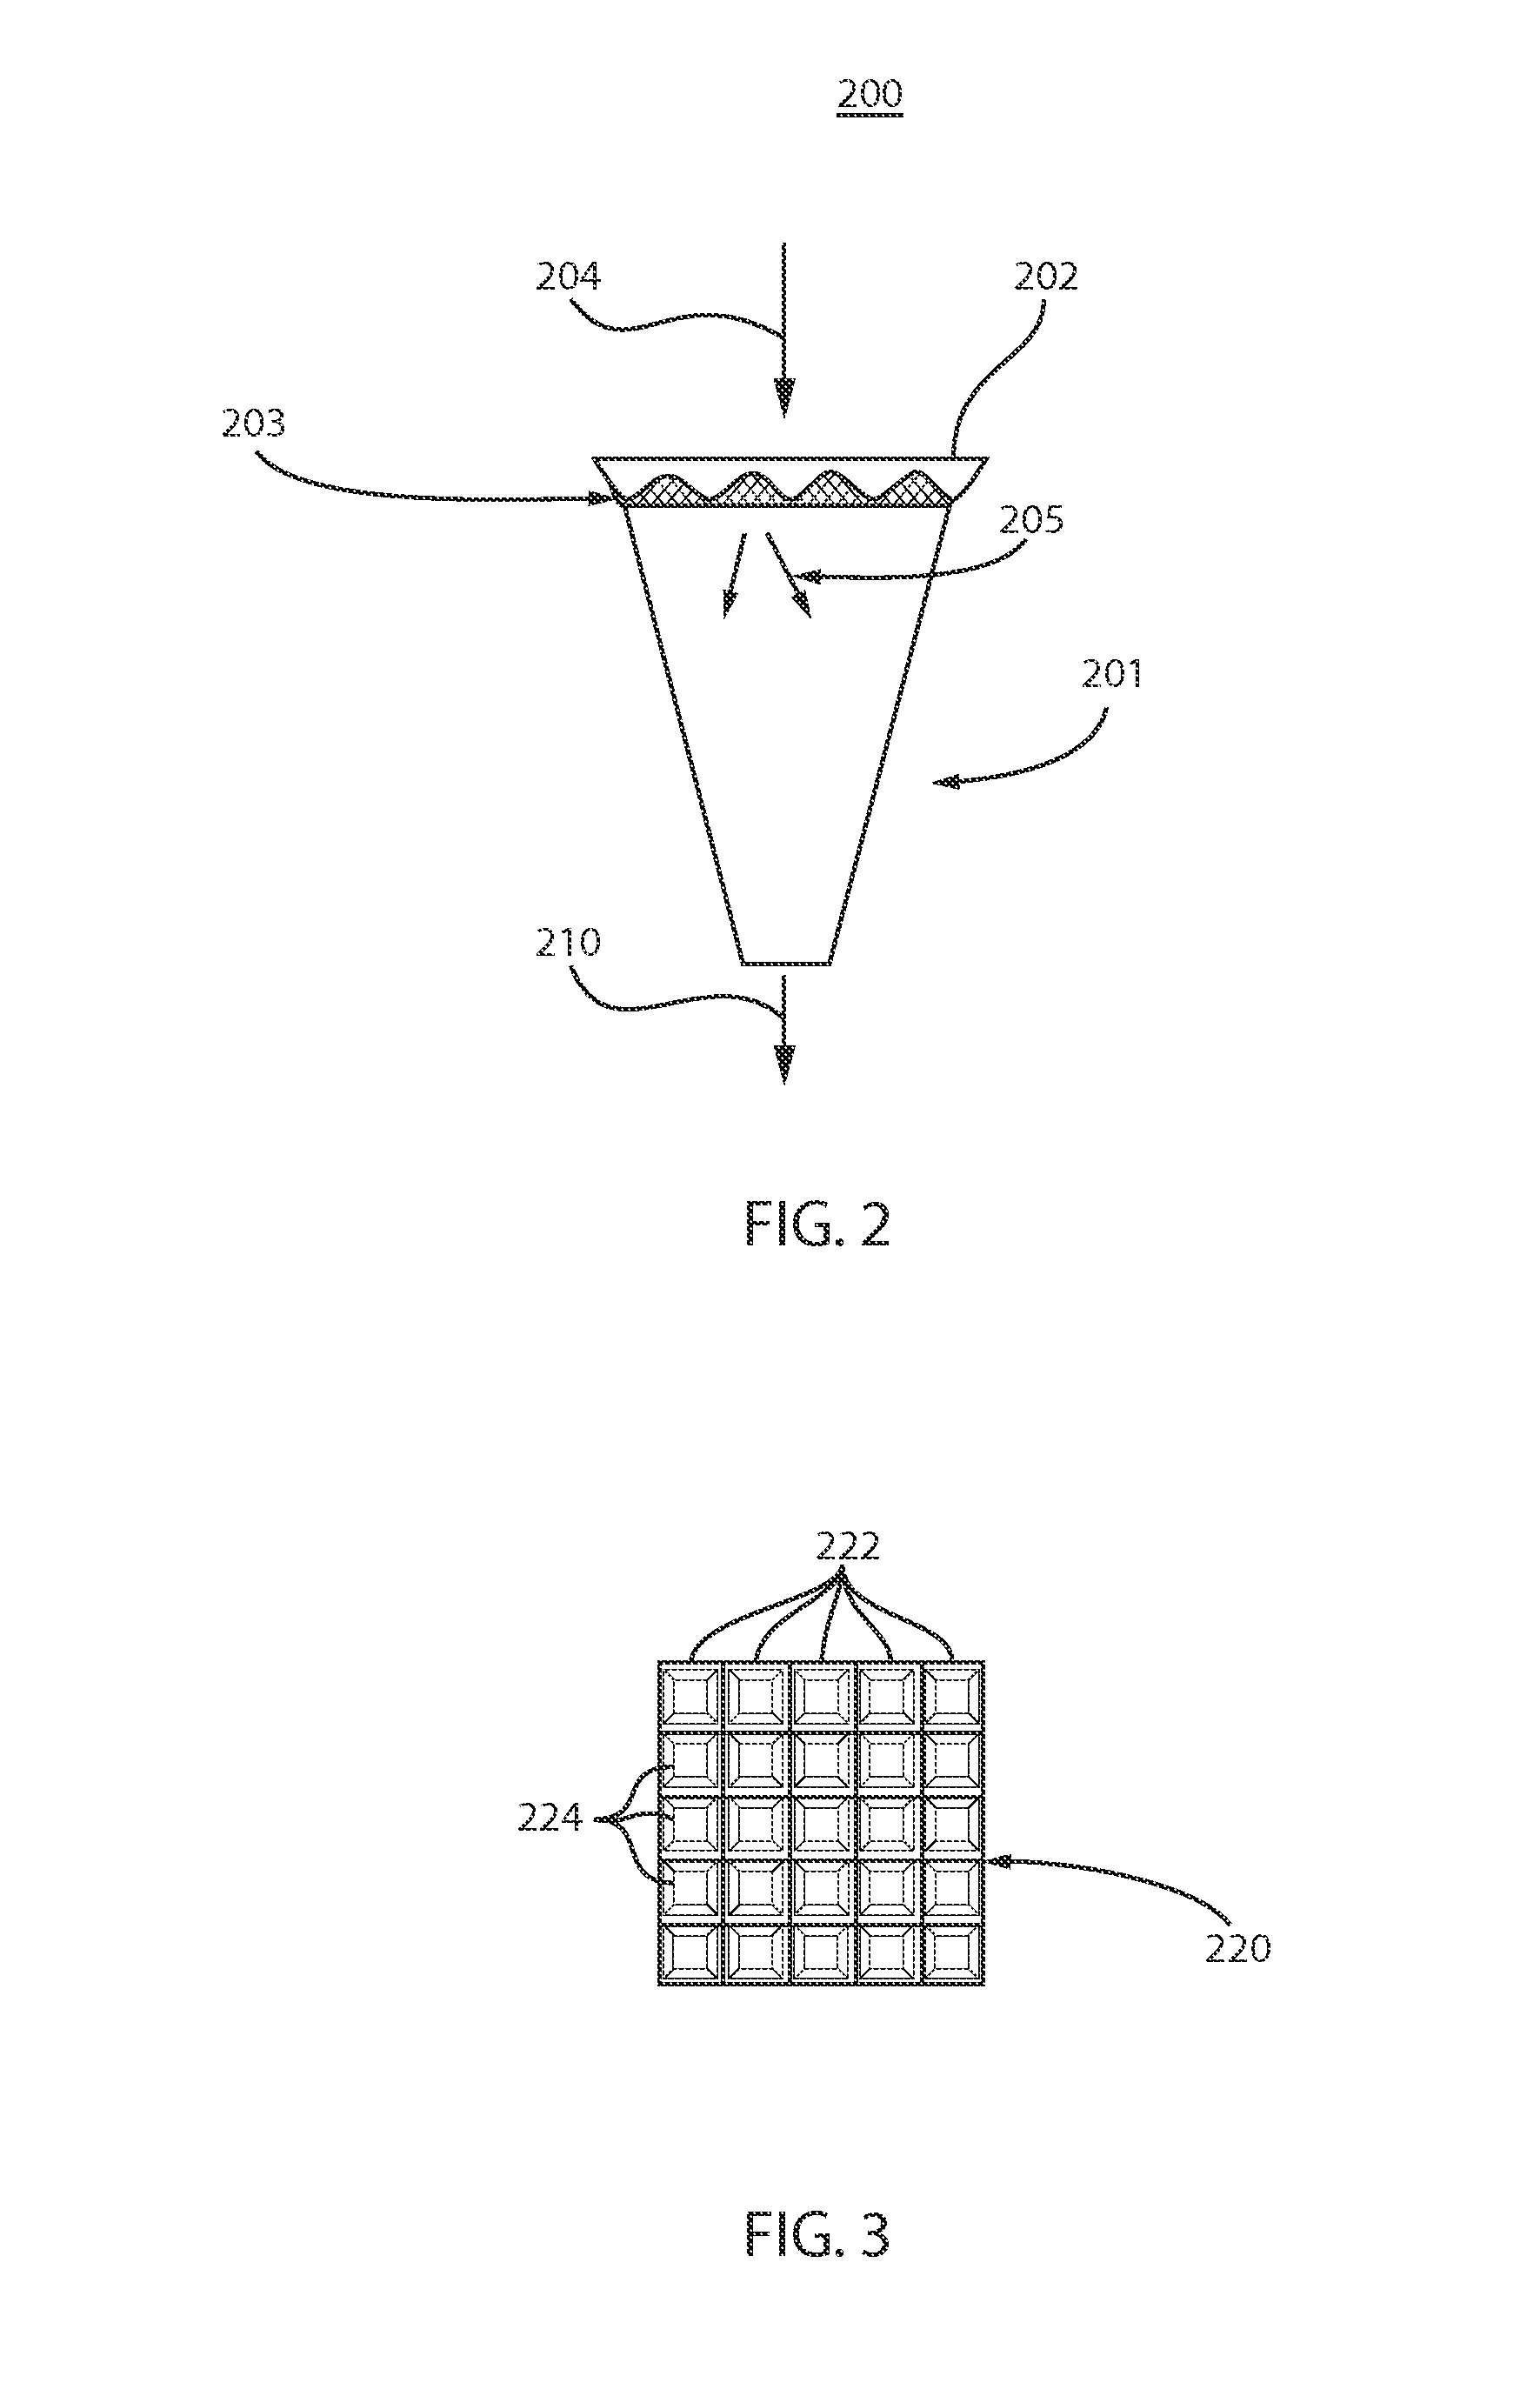 Secondary optic for concentrating photovoltaic device